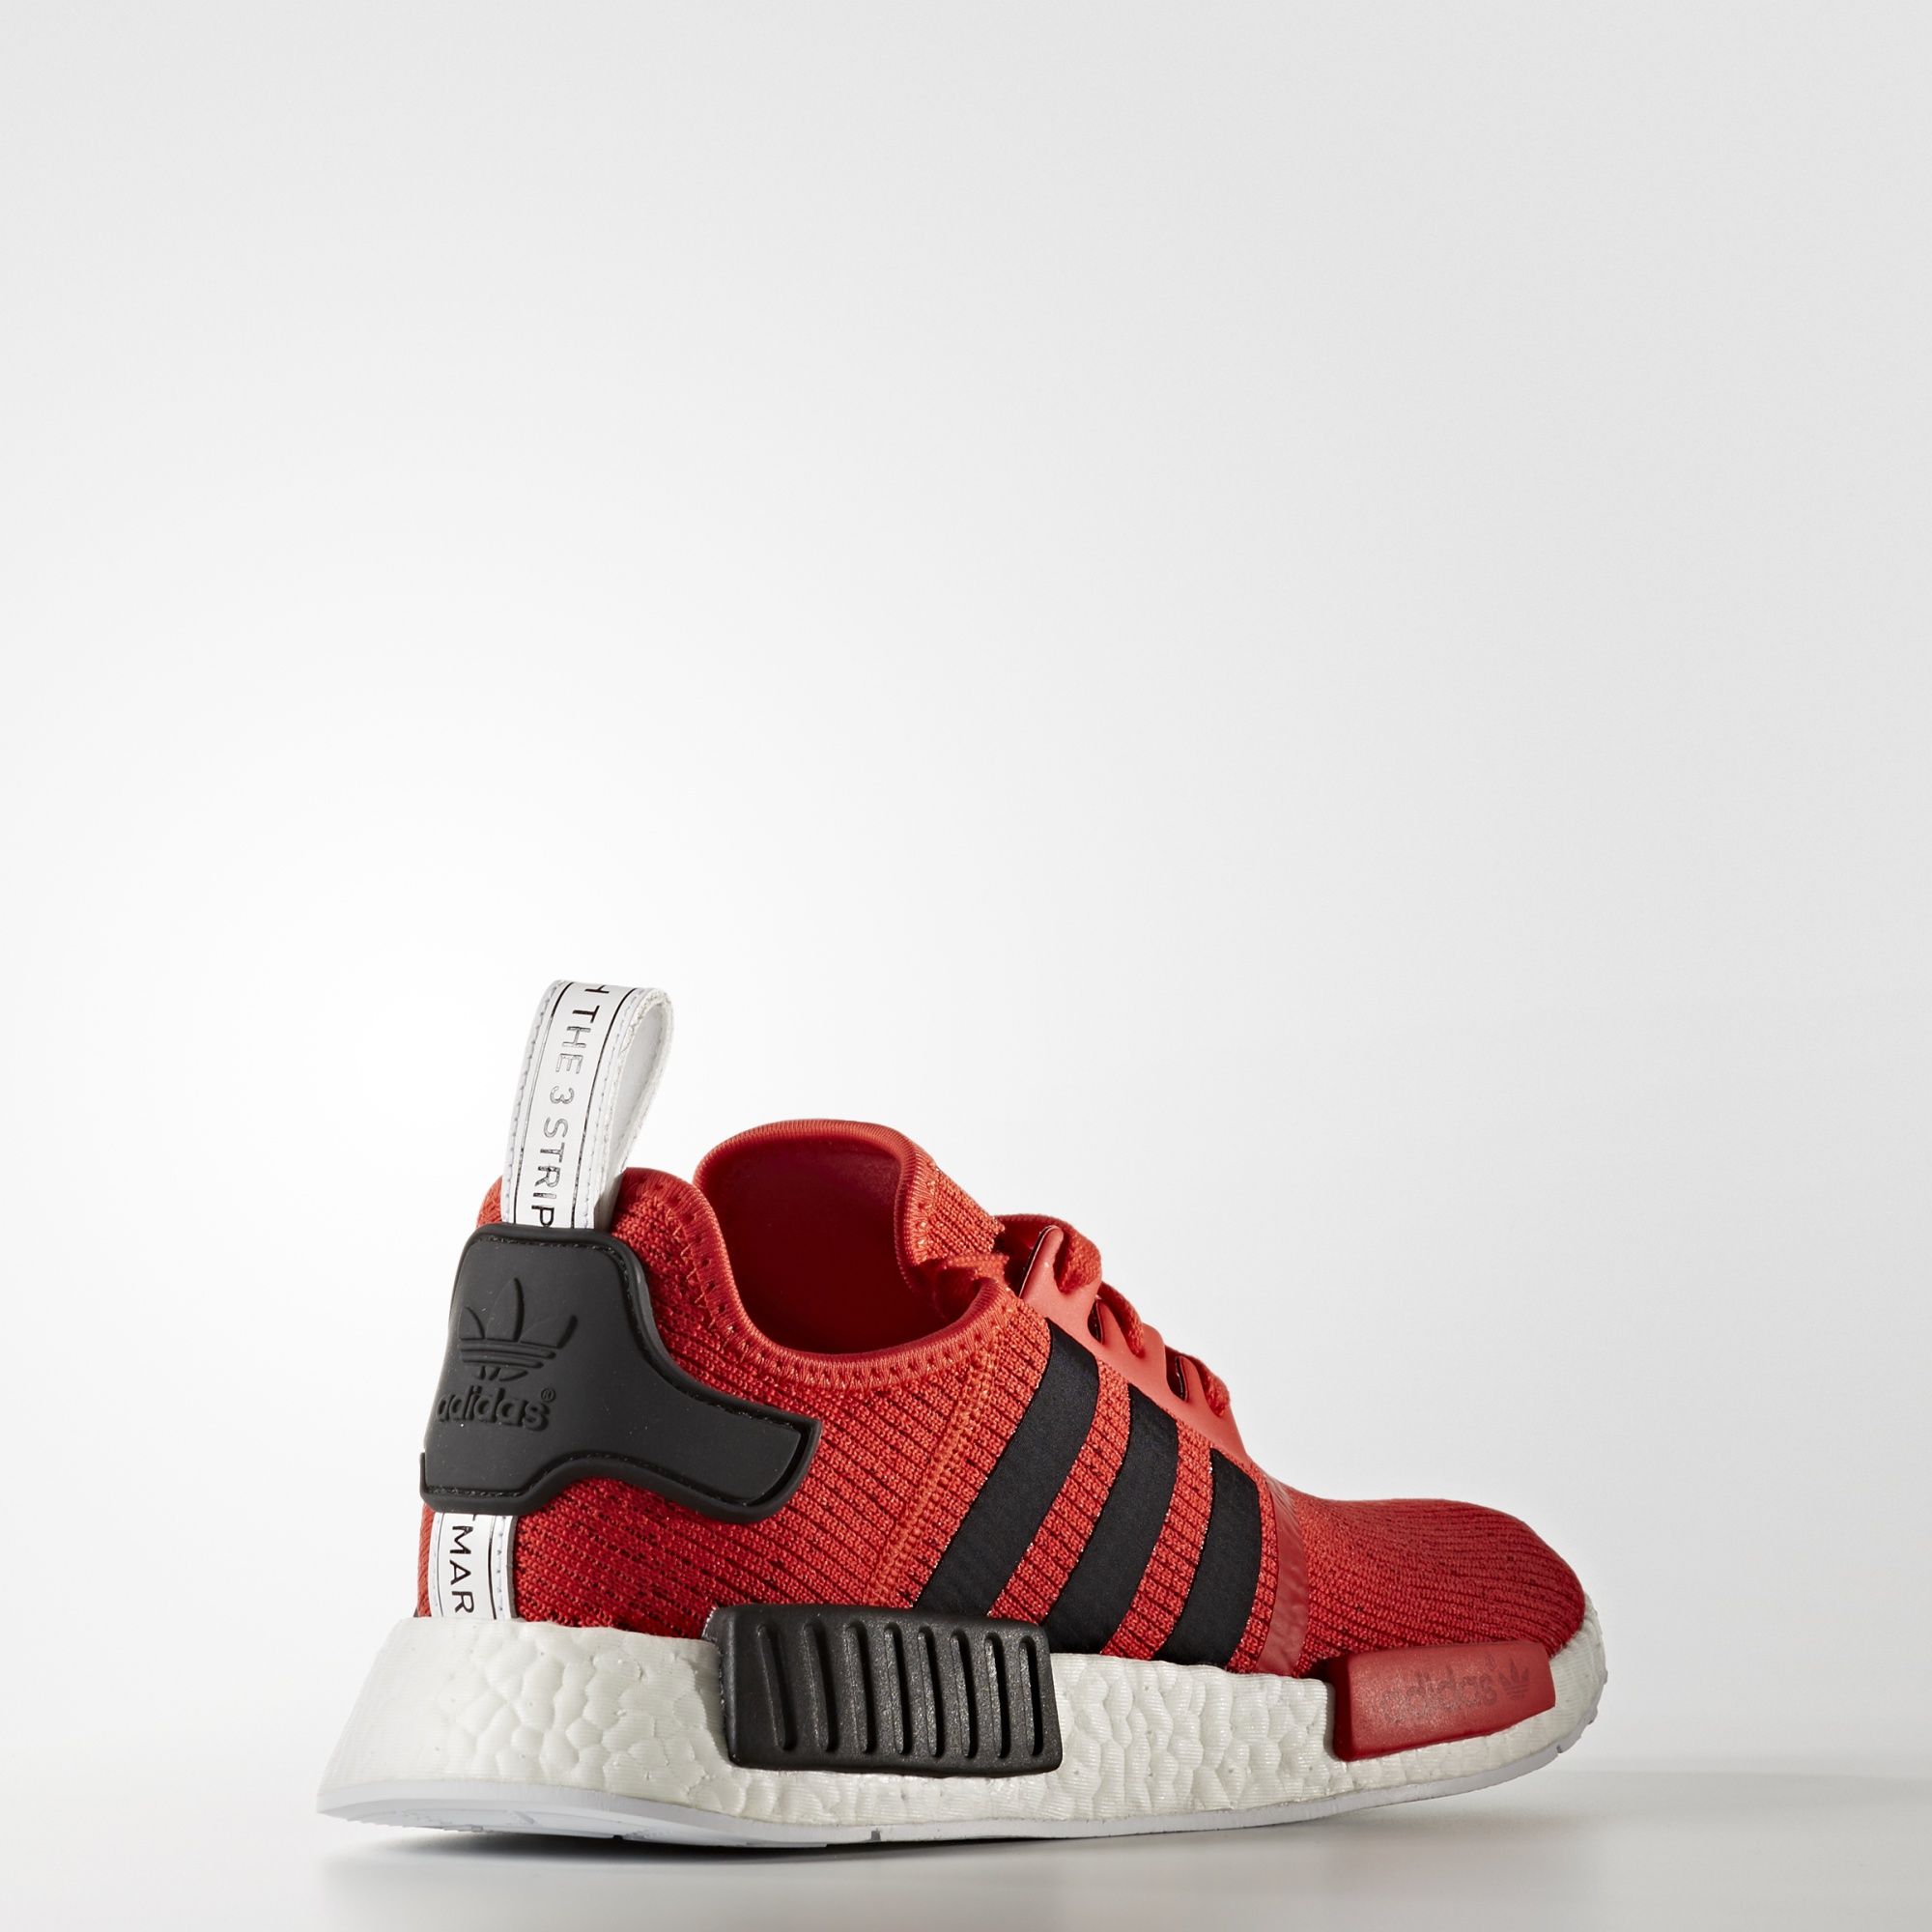 adidas-nmd_r1-core-red-black-2